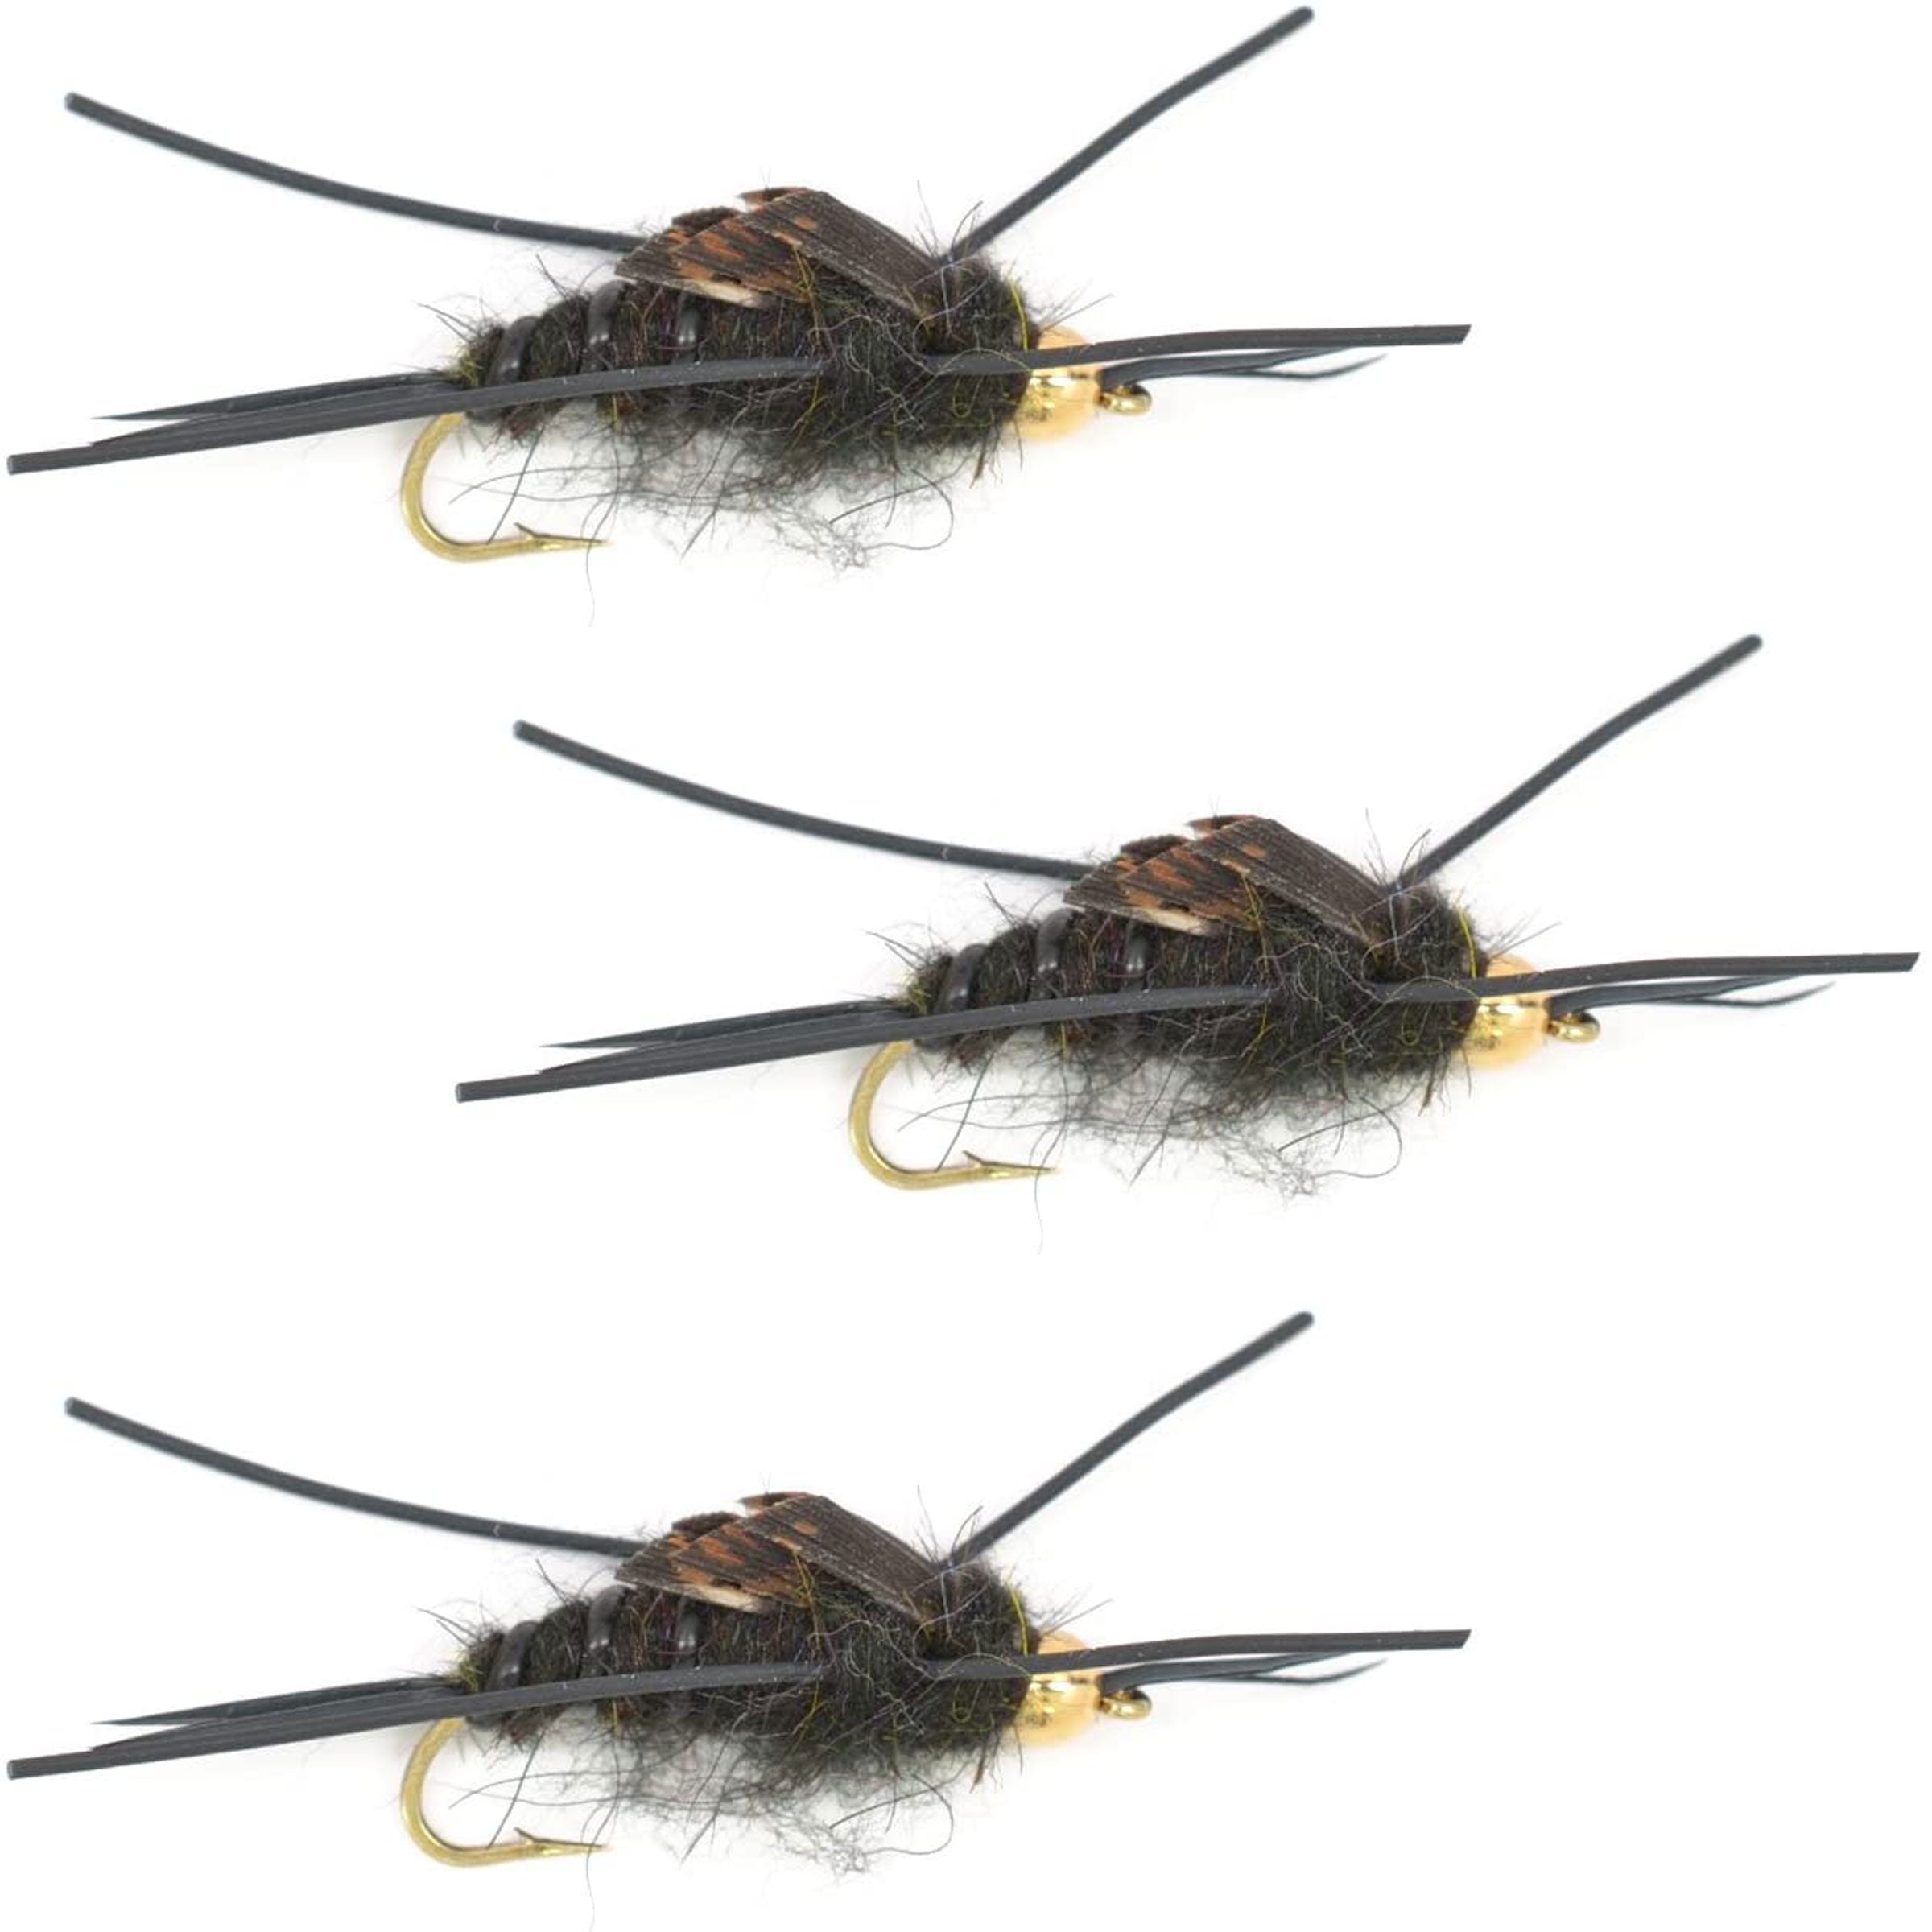 3 Pack Tungsten Bead Kaufmann's Black Stone Fly with Rubber Legs - Stonefly Wet Fly - Hook Size 6